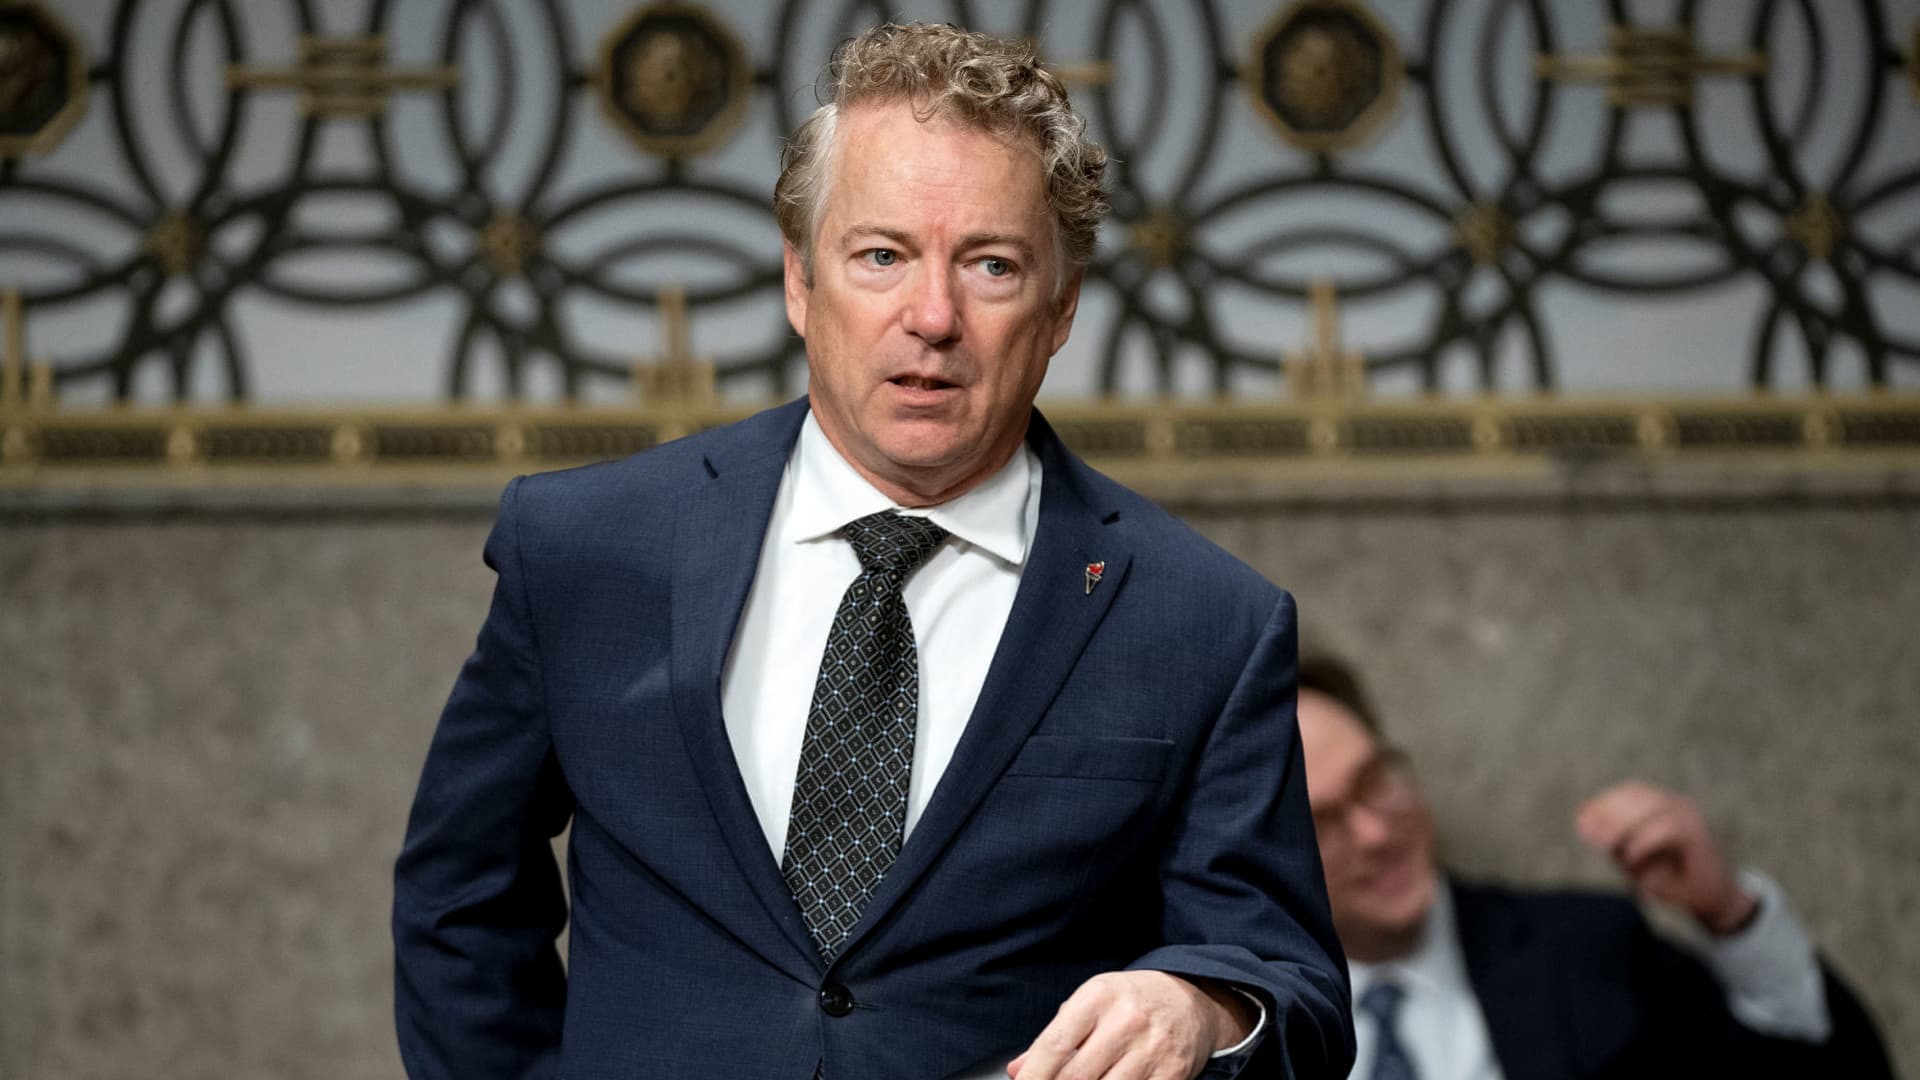 U.S. Senator Rand Paul (R-KY) arrives for a Senate Health, Education, Labor, and Pensions Committee hearing to examine the federal response to the coronavirus disease (COVID-19) and new emerging variants at Capitol Hill in Washington, D.C., U.S. January 11, 2022.